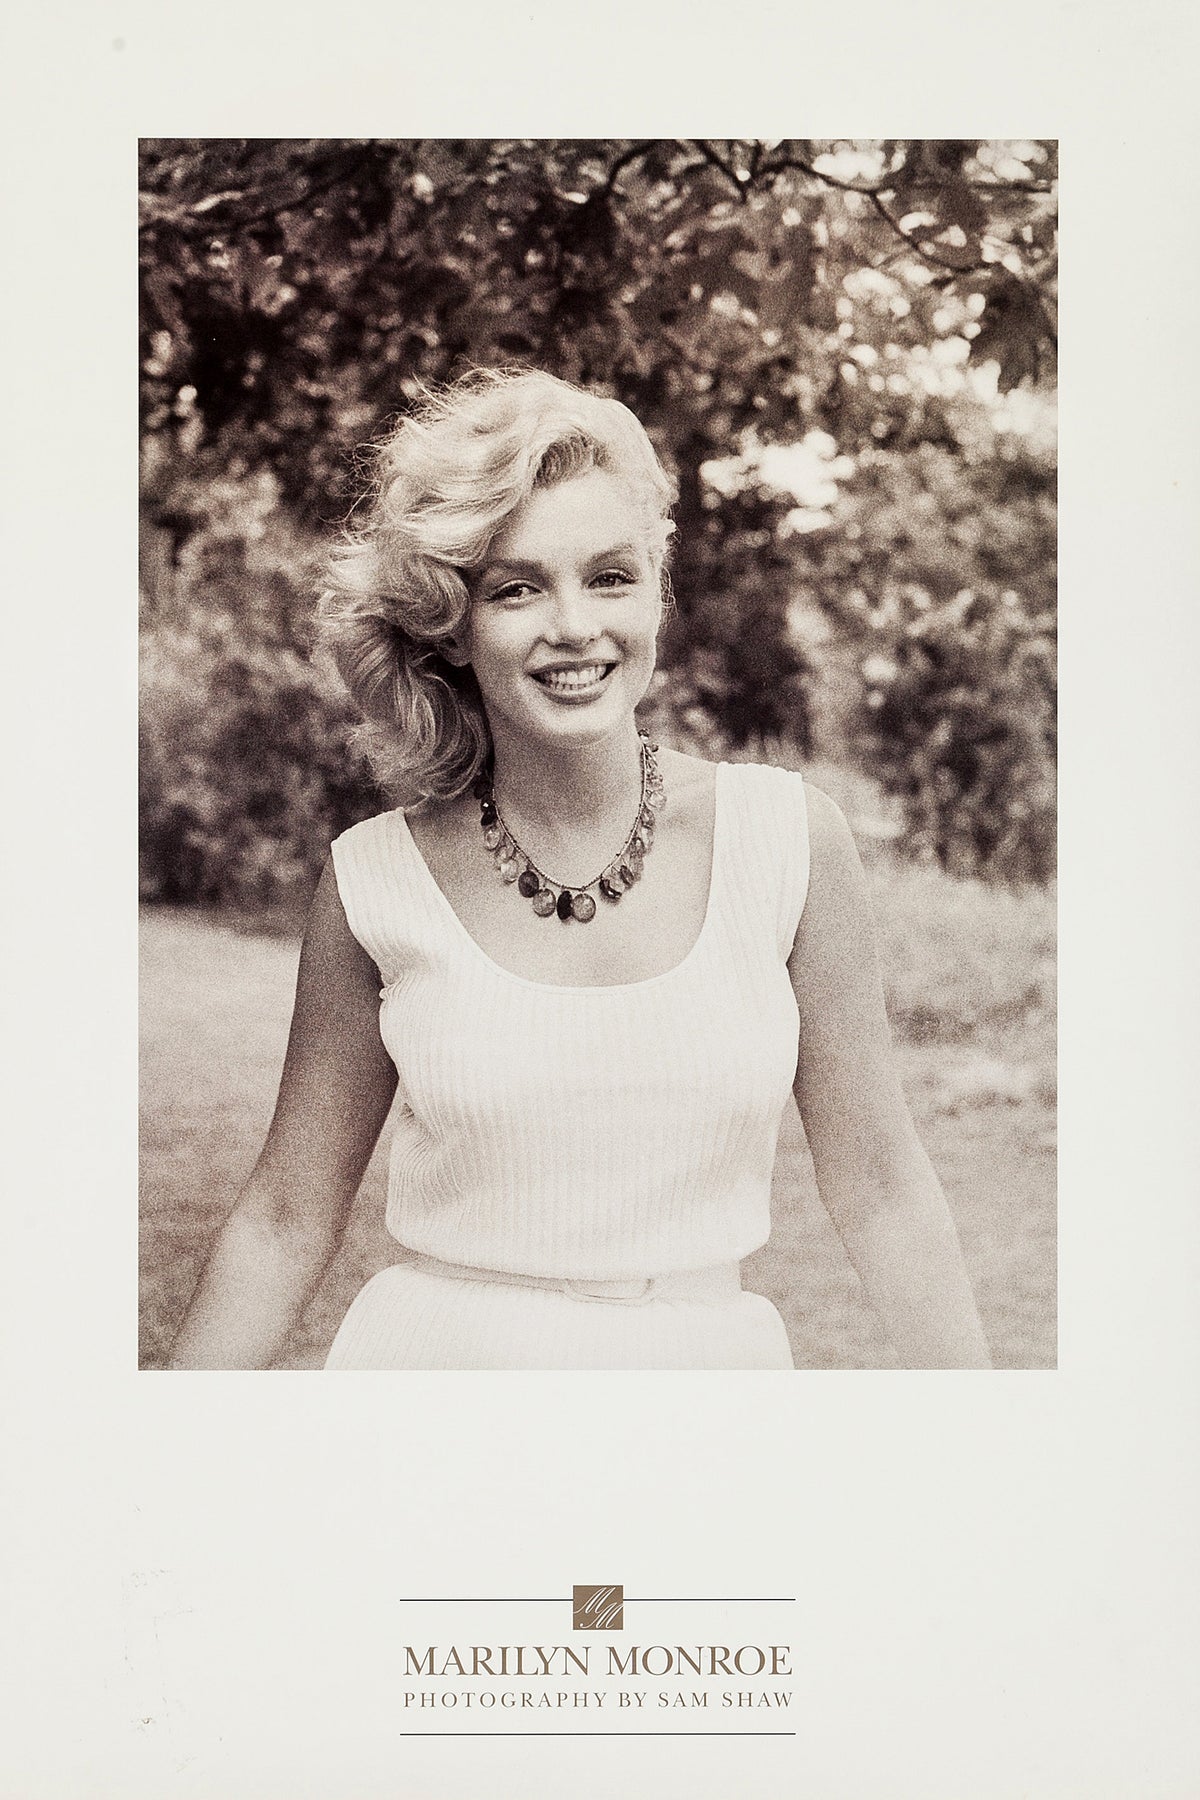 Marilyn Monroe Photography by Sam Shaw (Accent Editions, 1991)